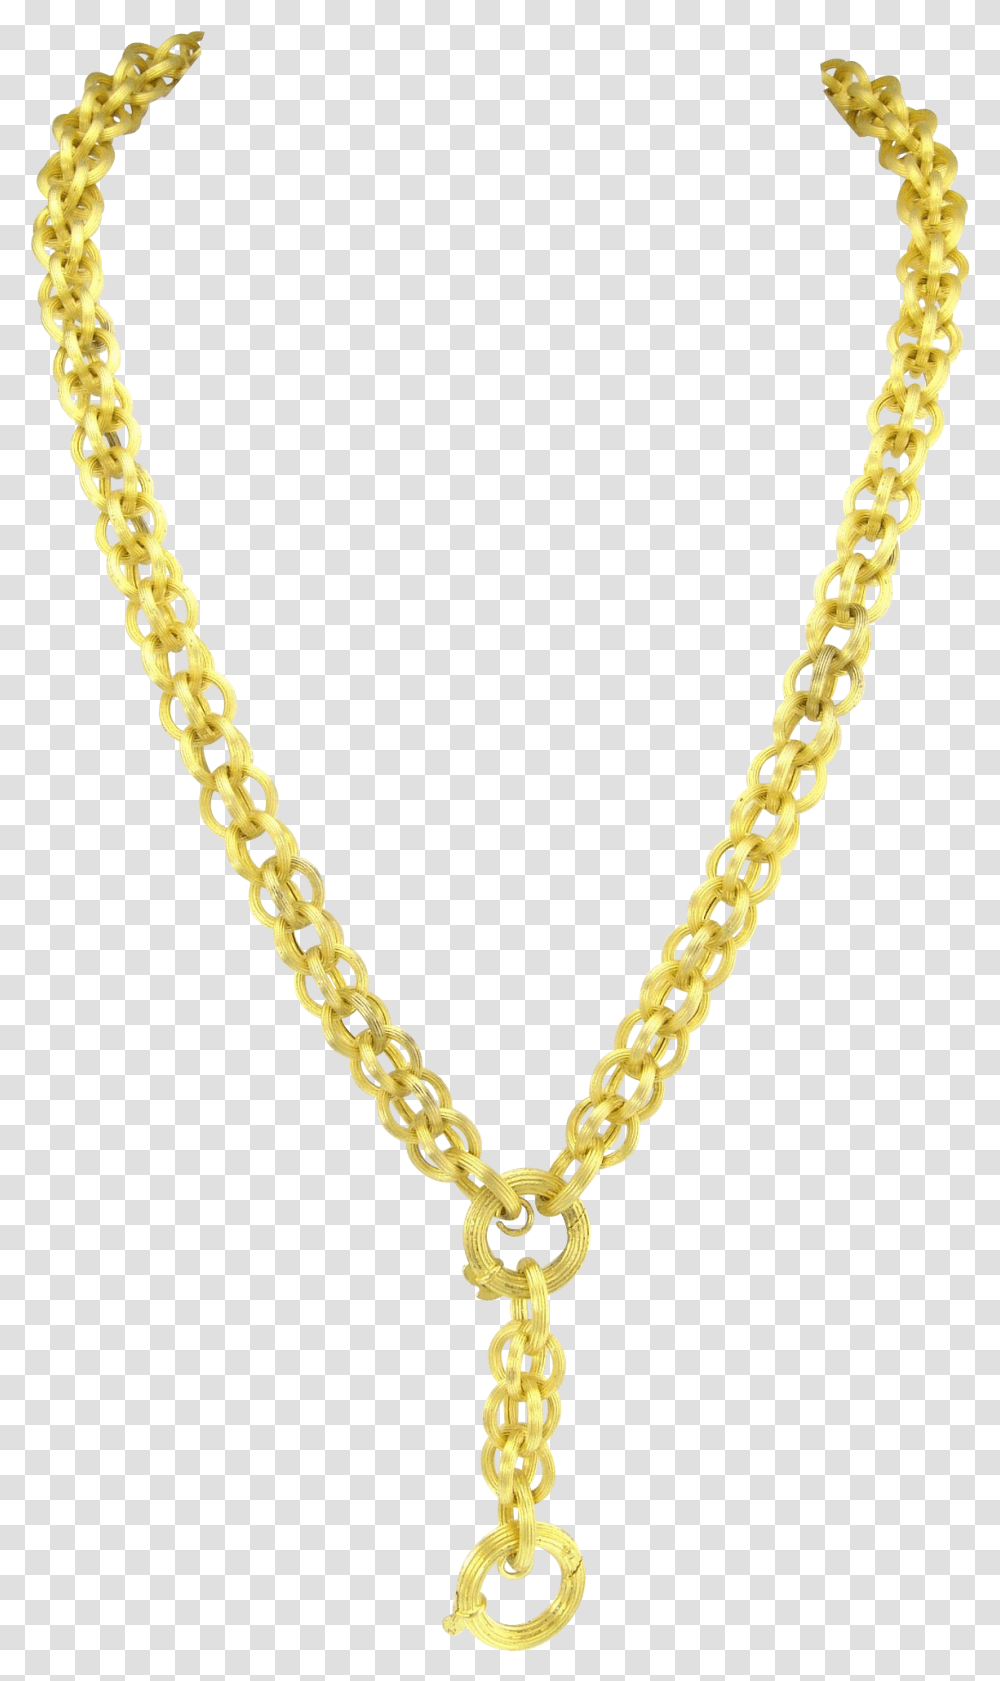 Jewelry Clipart Gold Chain Picsart Gold Chain, Necklace, Accessories, Accessory, Pendant Transparent Png